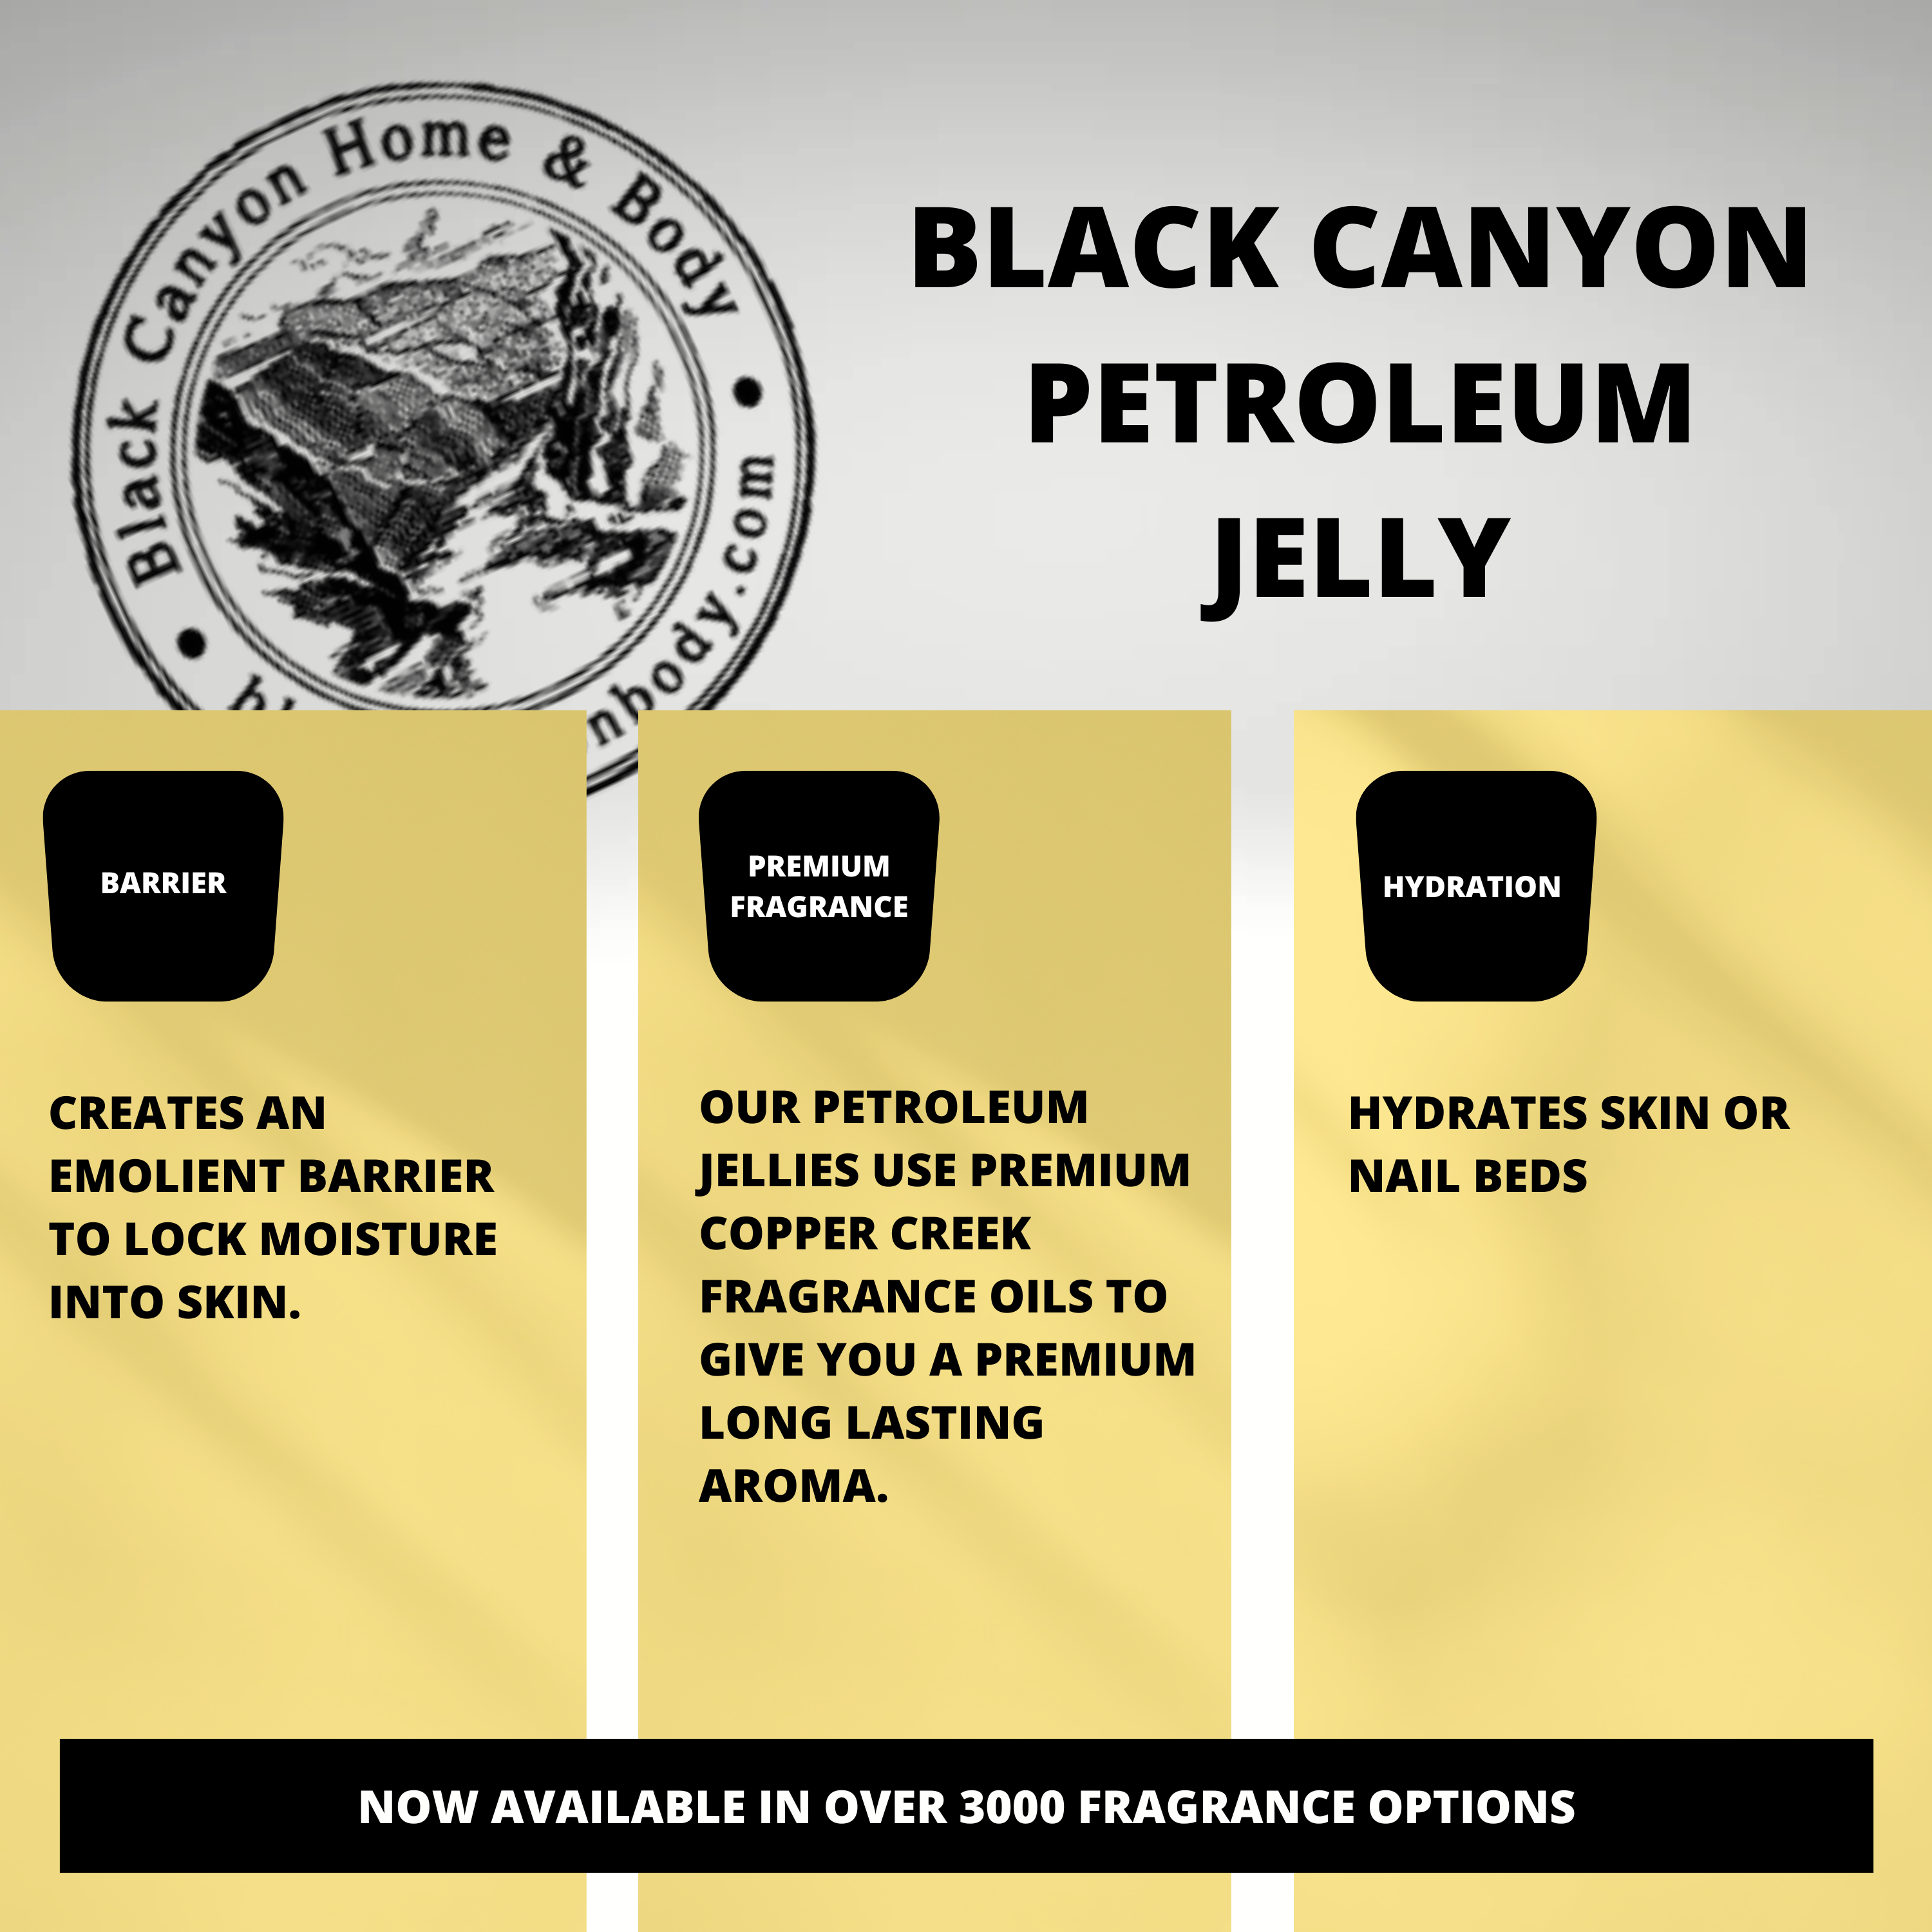 Black Canyon Black Apple Orchard Scented Petroleum Jelly